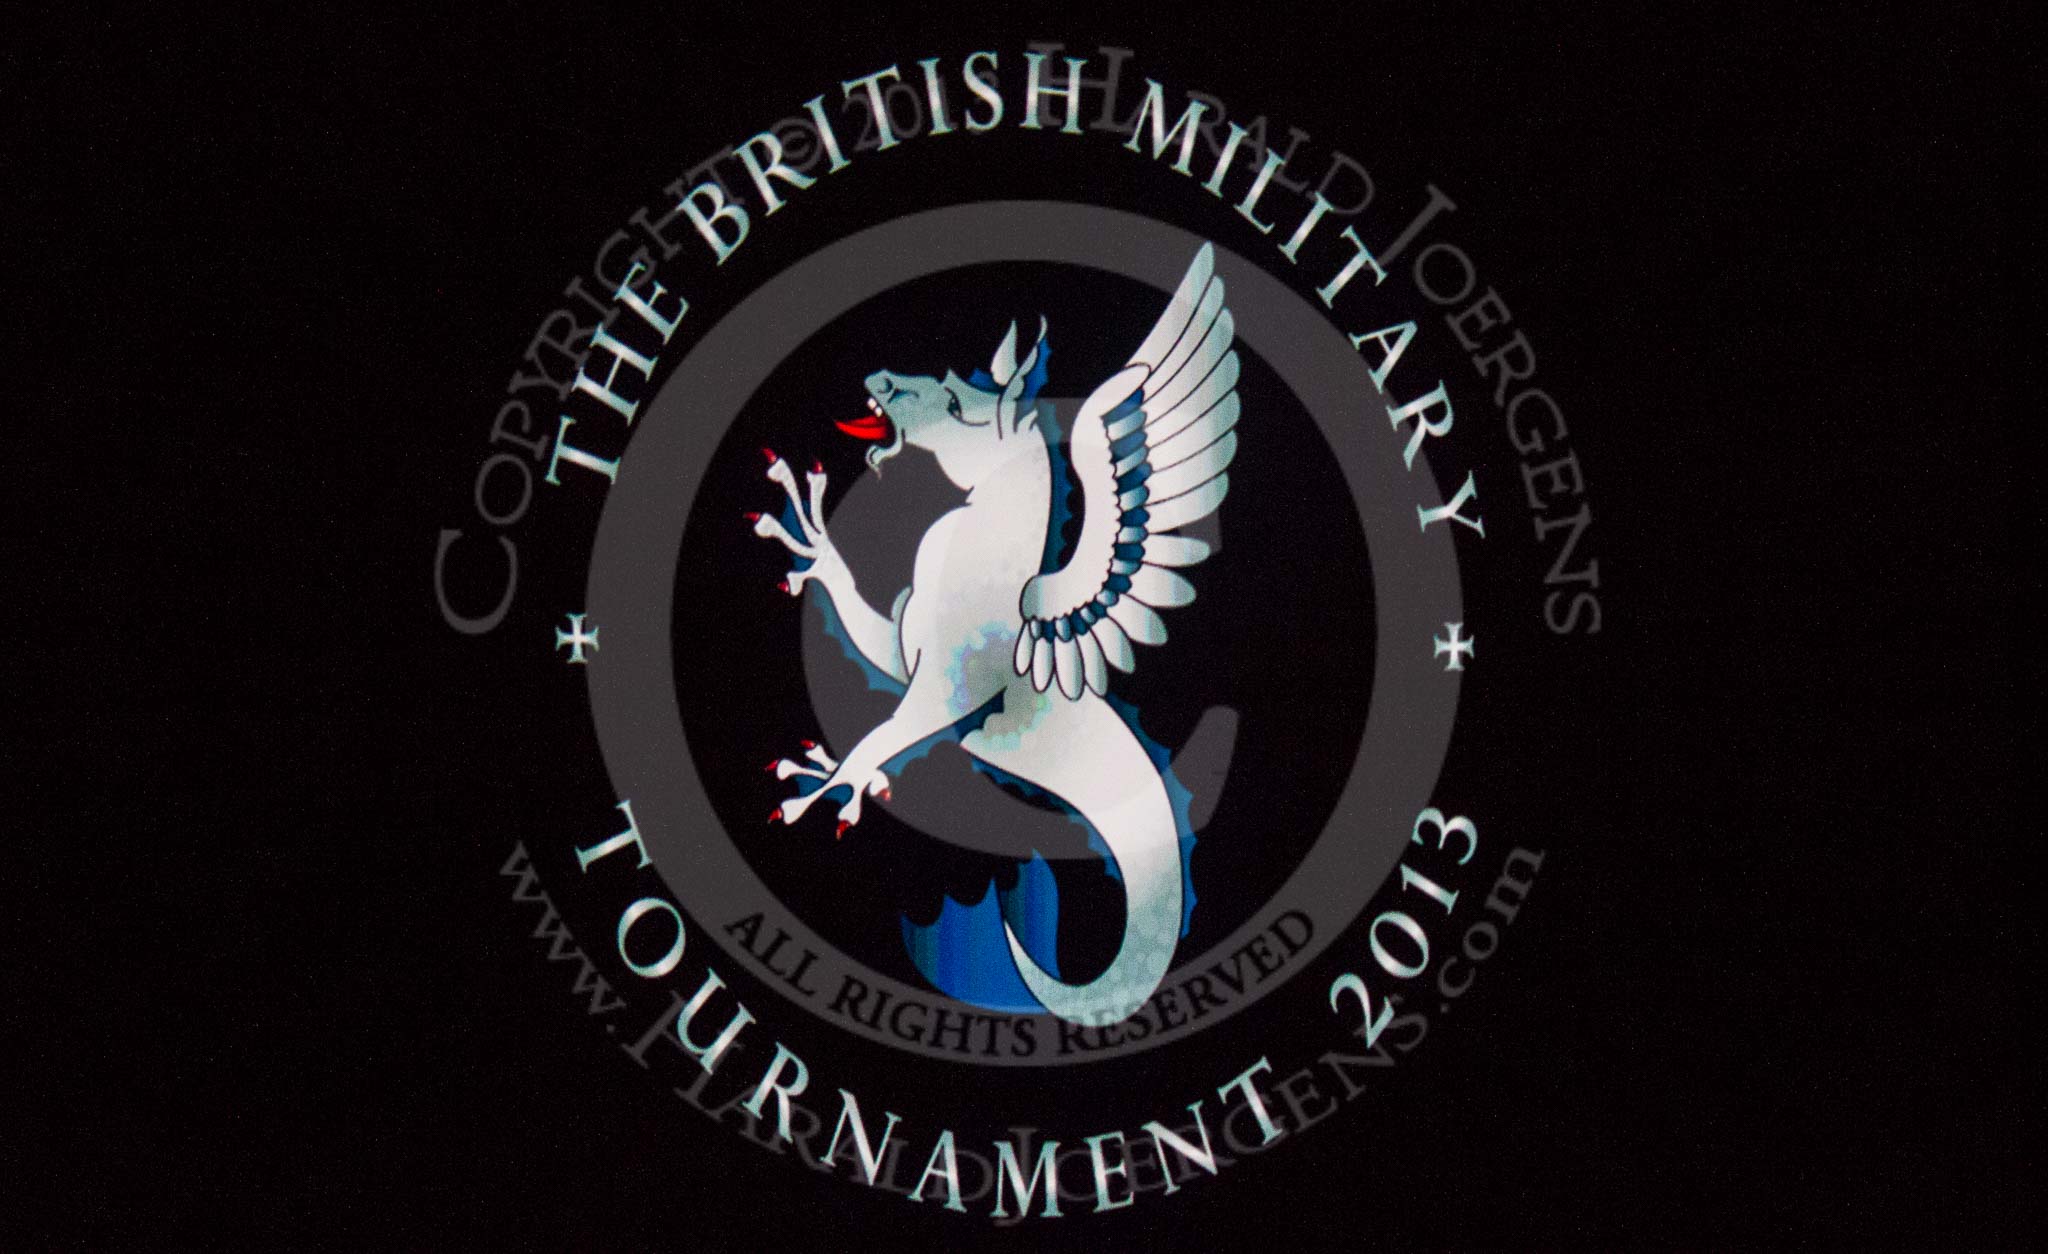 British Military Tournament 2013.
Earls Court,
London SW5,

United Kingdom,
on 06 December 2013 at 14:42, image #25